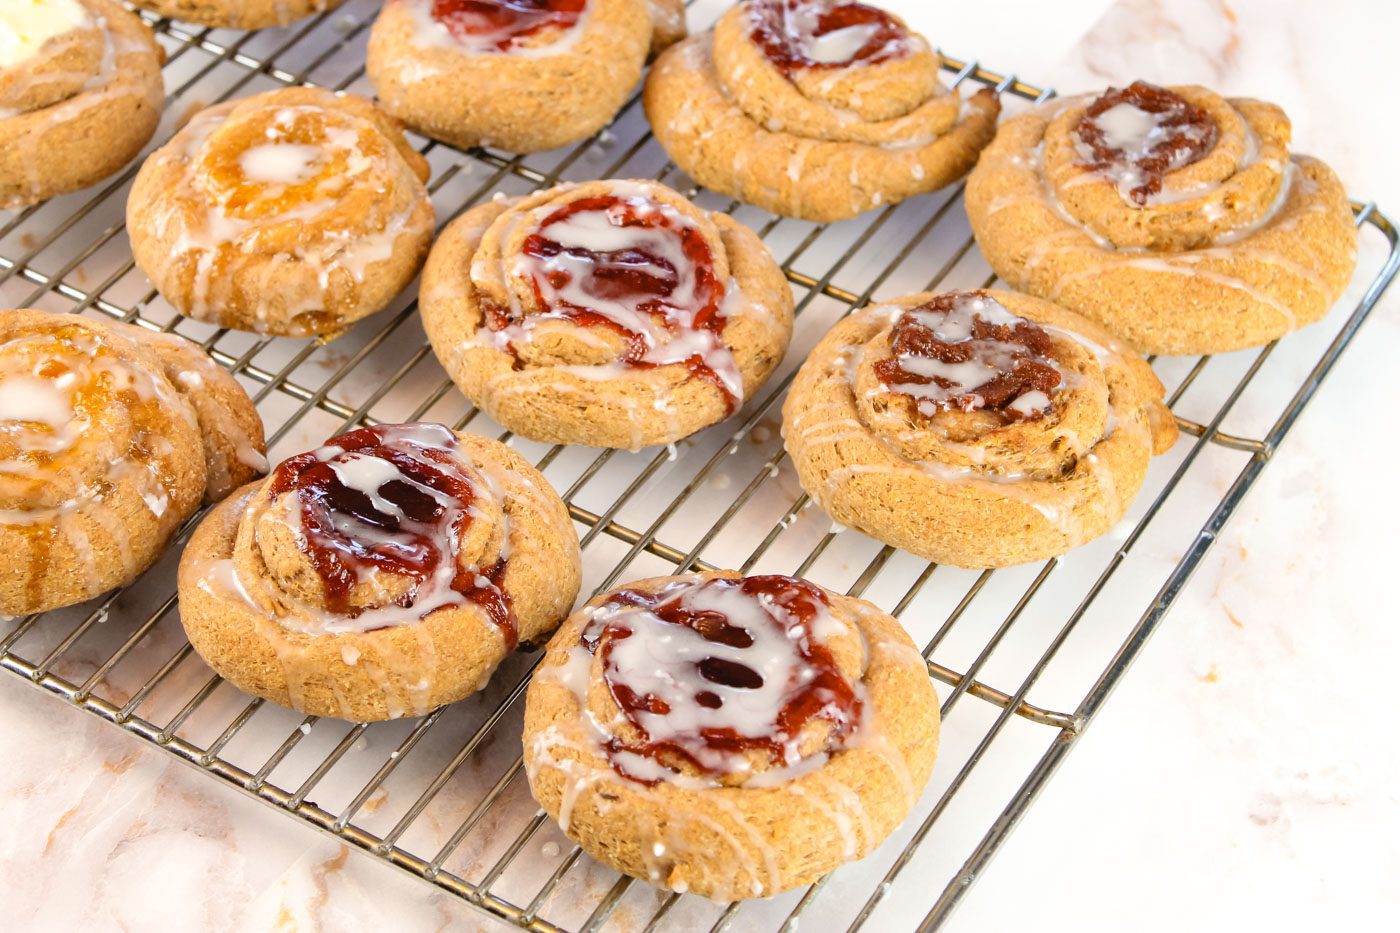 a dozen danishes filled with different jams sit on a metal cooling rack against a marble countertop